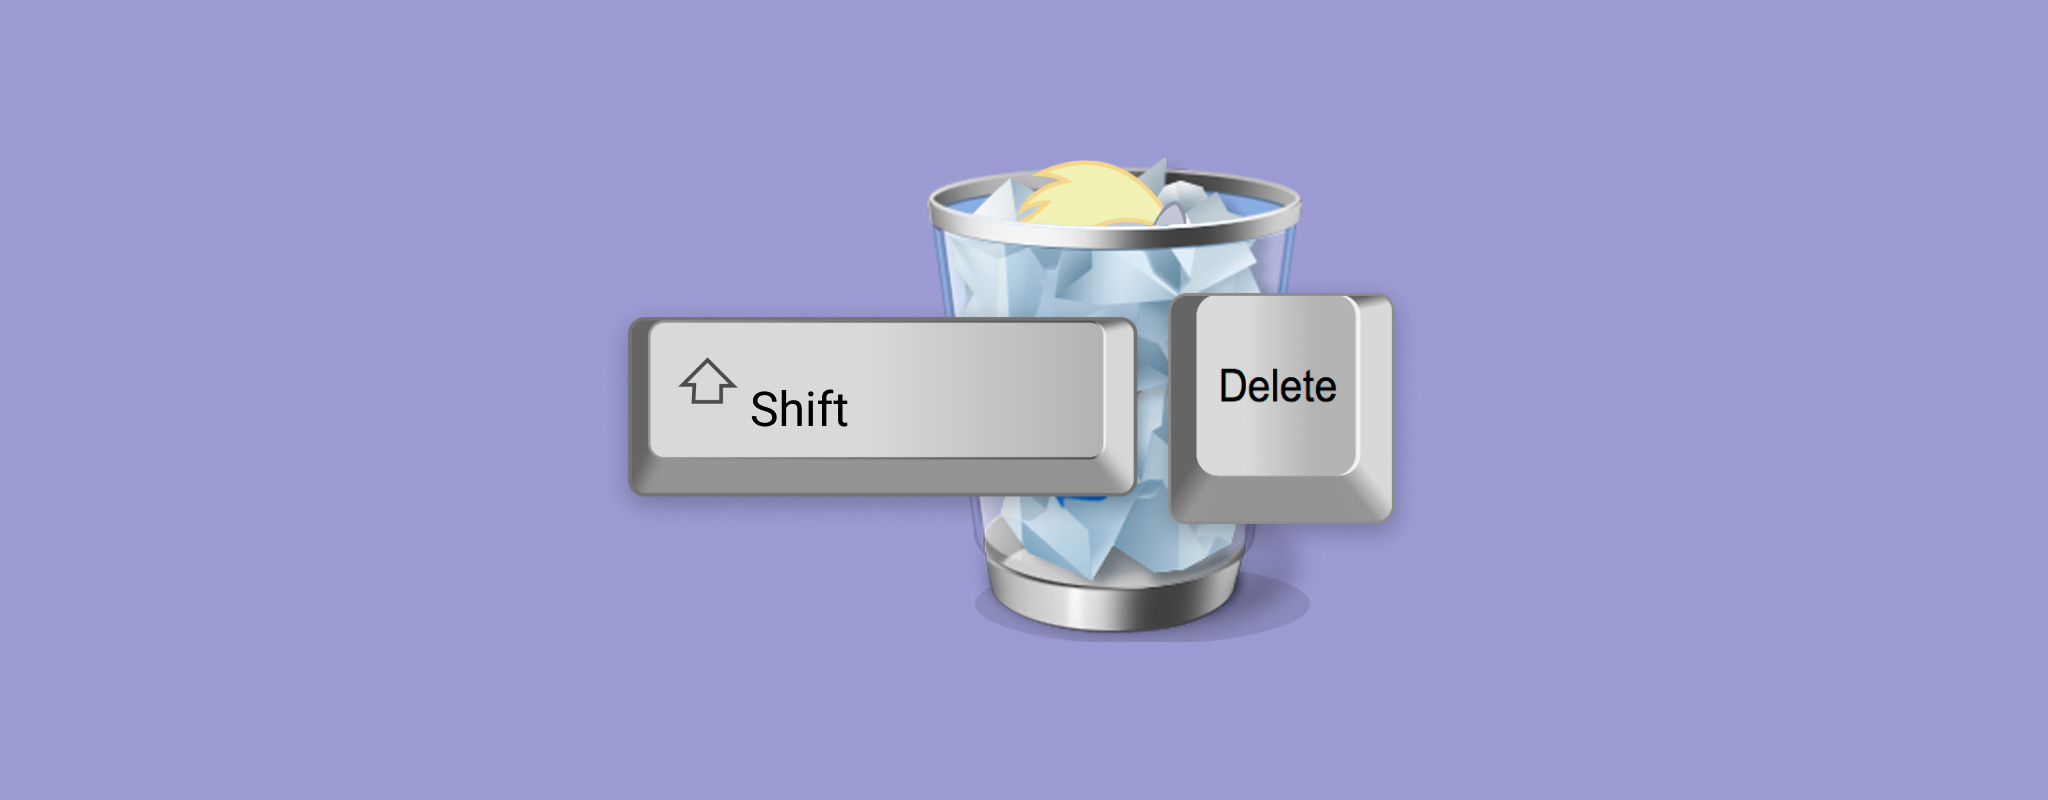 Recover shift deleted files